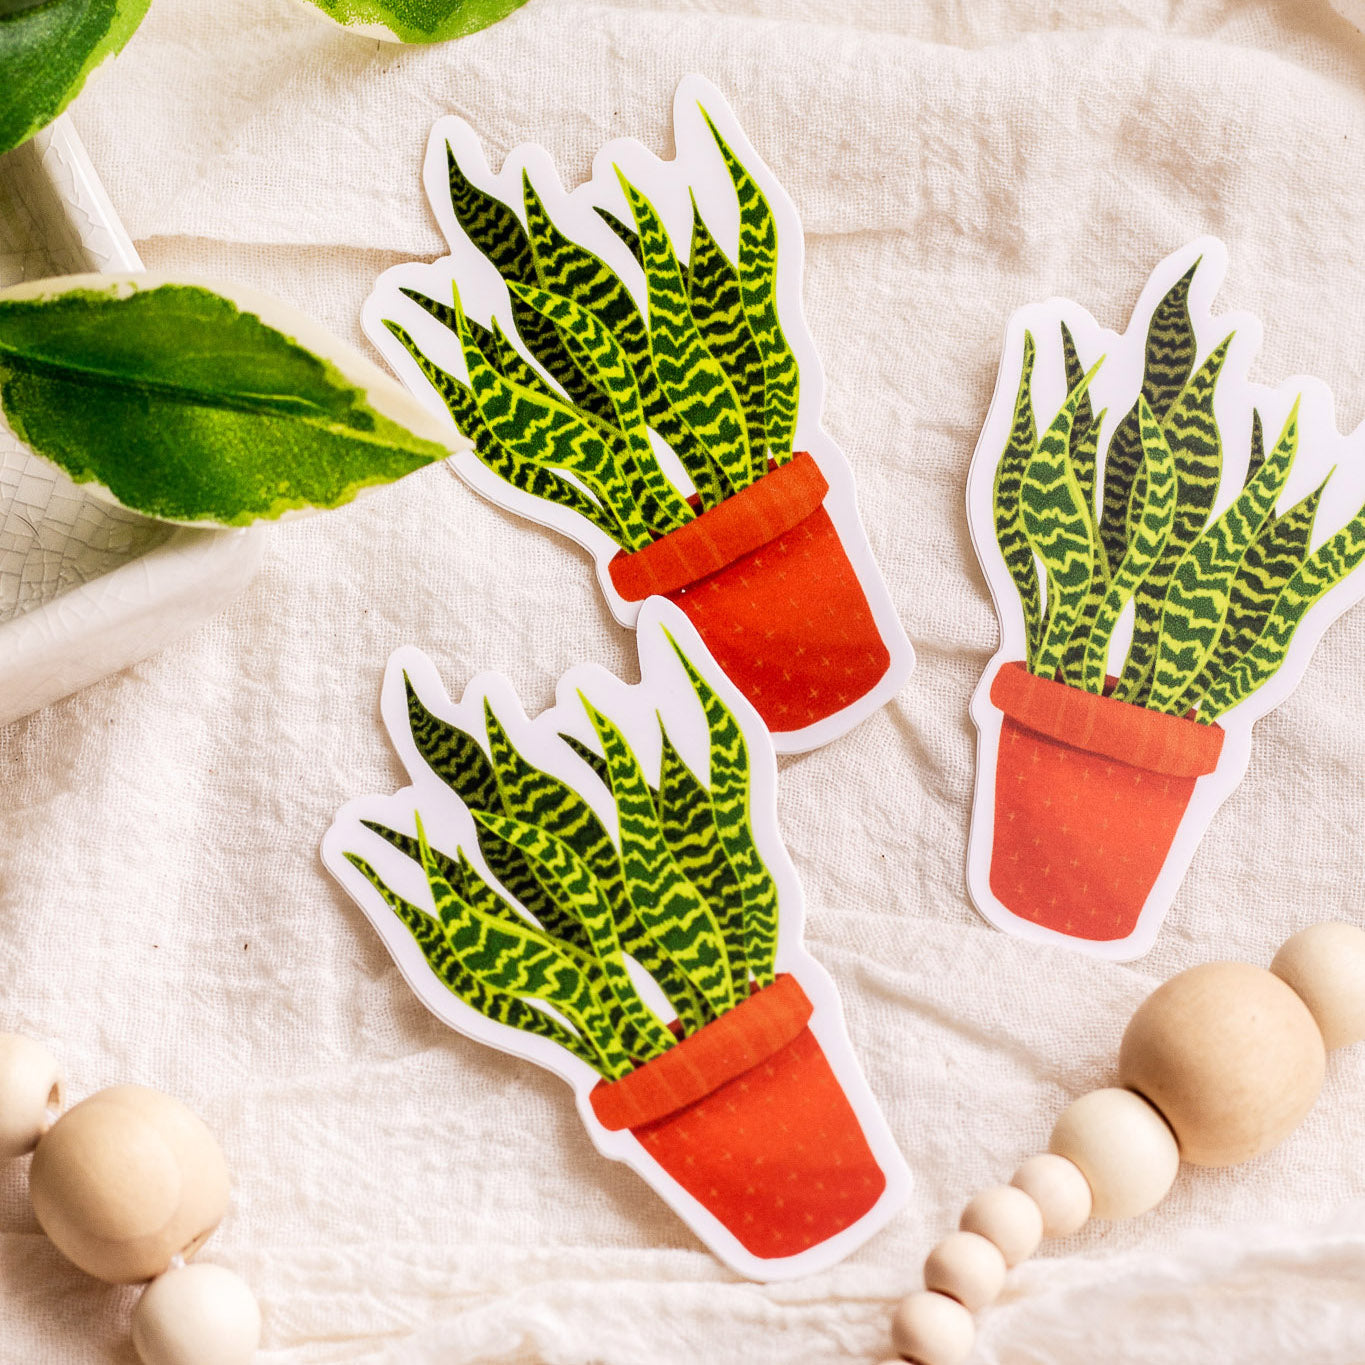 Snake Plant Vinyl Stickers laying on decorative fabric with greenery next to them